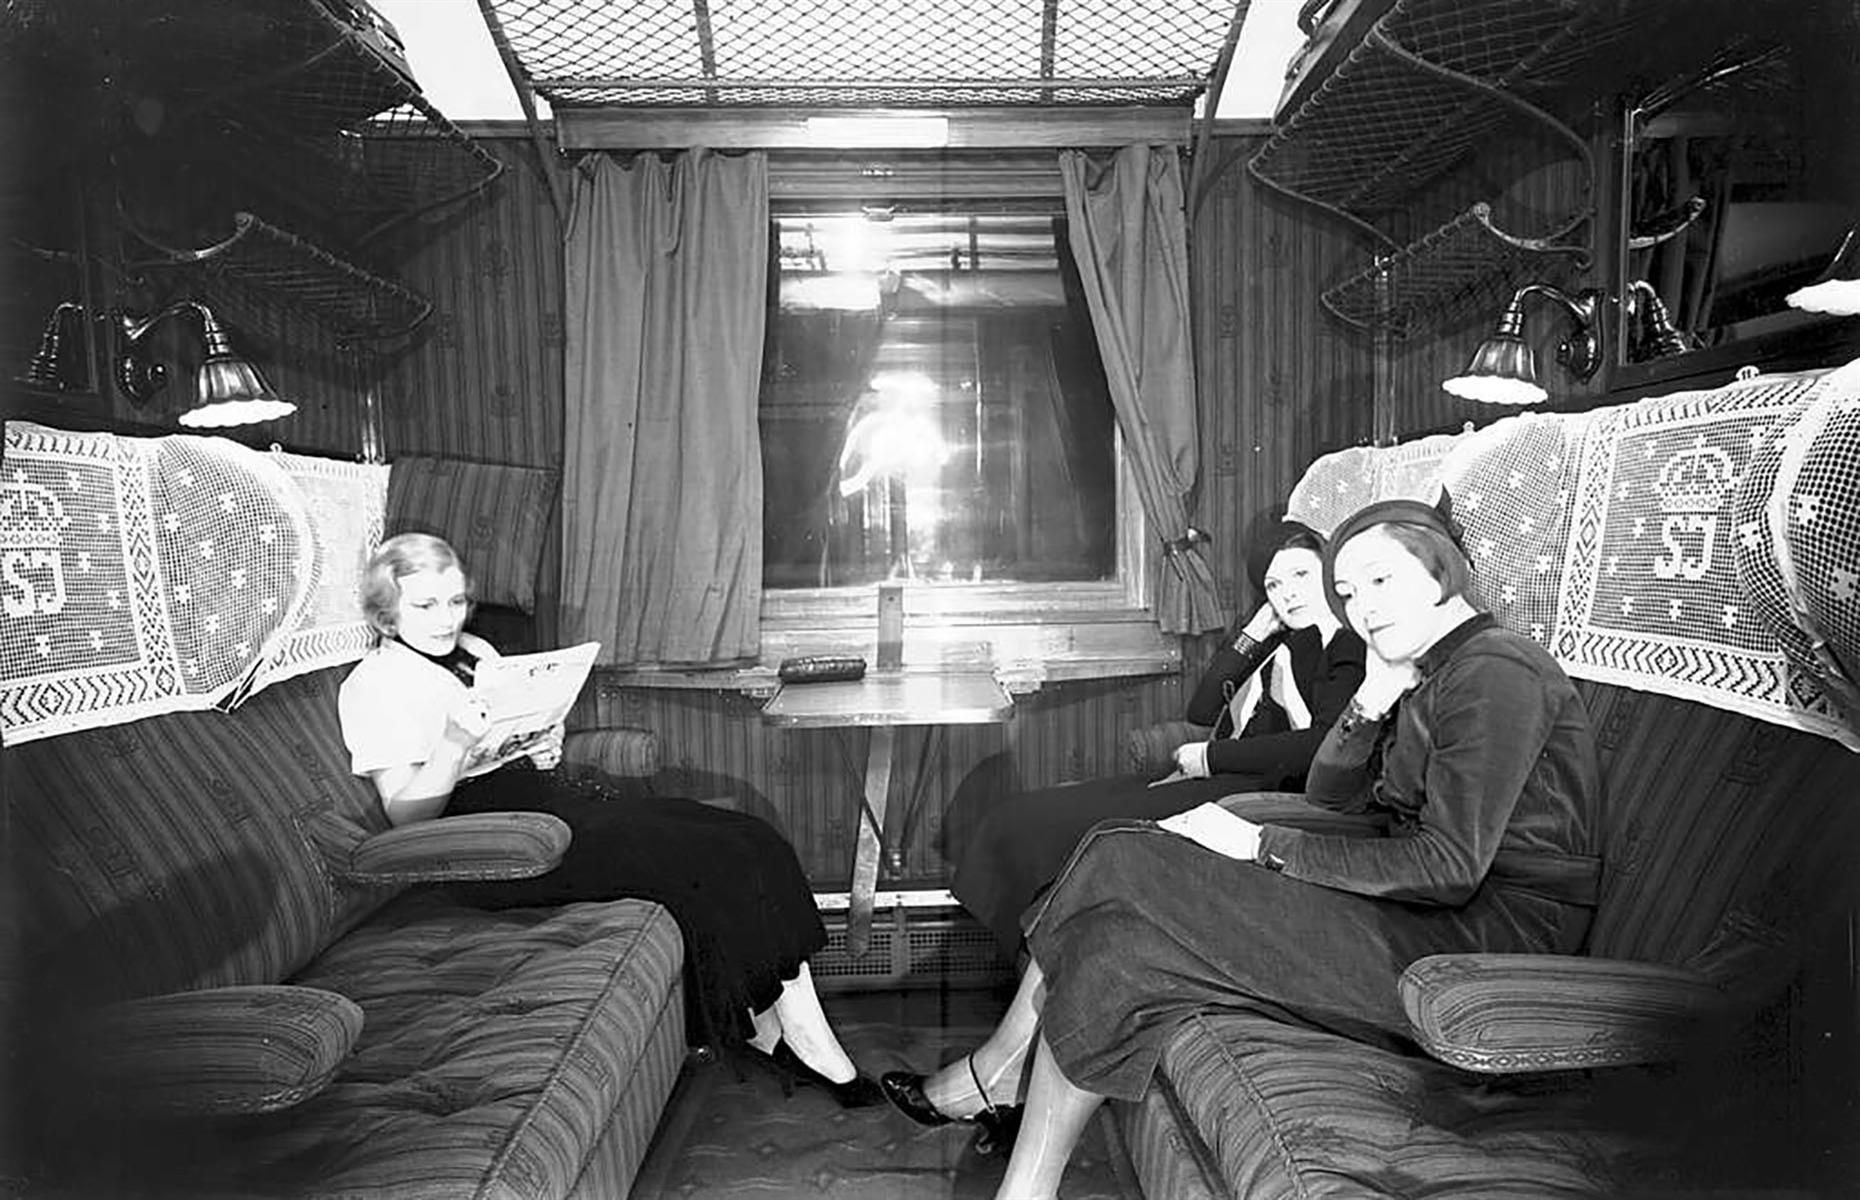 This image shows that travelling in second class was still very comfortable in some state-operated trains like Sweden. The SJ on the embroidered head rest covers stands for Statens Järnvägar – Swedish for Swedish State Railways.